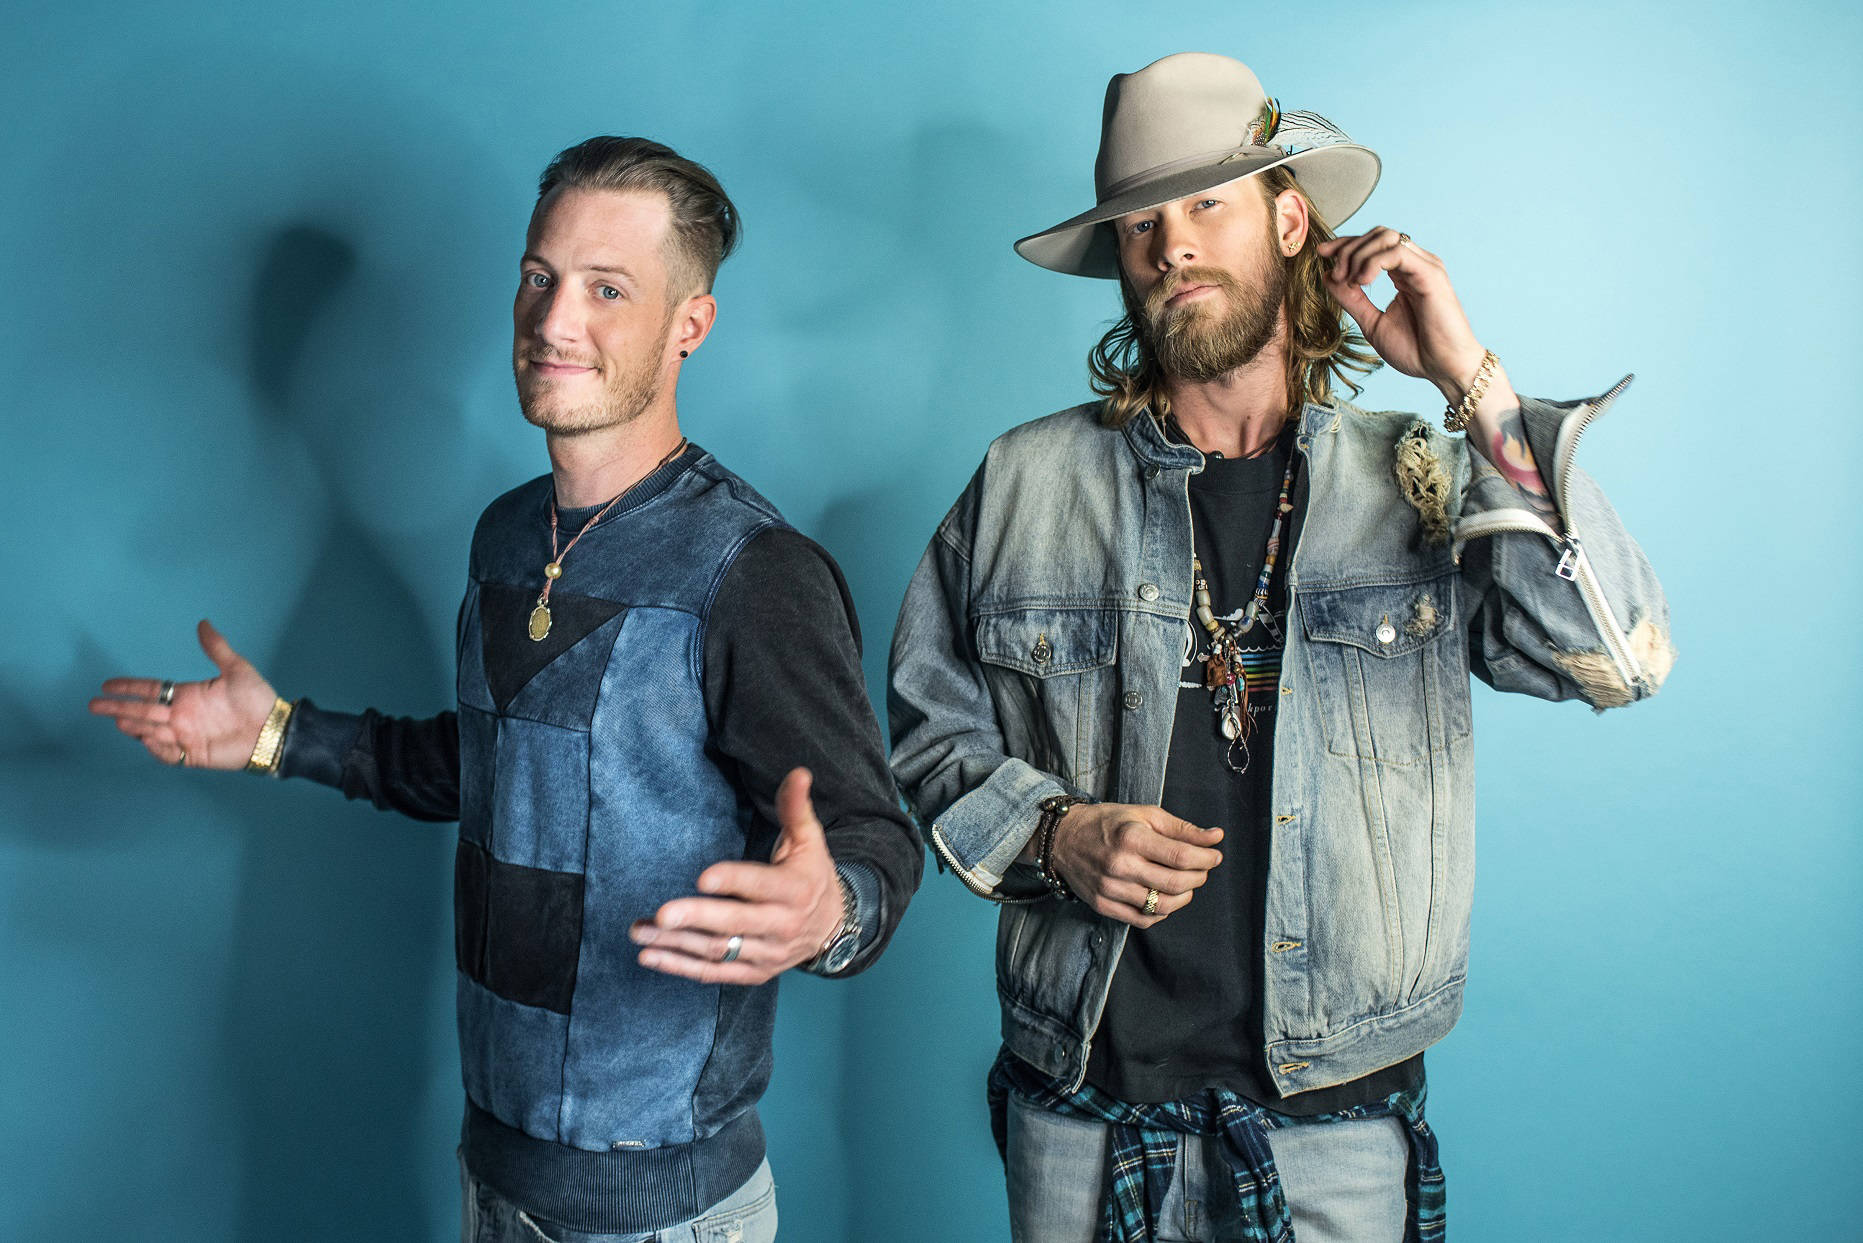 Florida Georgia Line – Tyler Hubbard, left, and Brian Kelley – has achieved major success since the duo’s inception, and are one of the most successful country music acts today. COURTESY PHOTO, Richard Lovrich